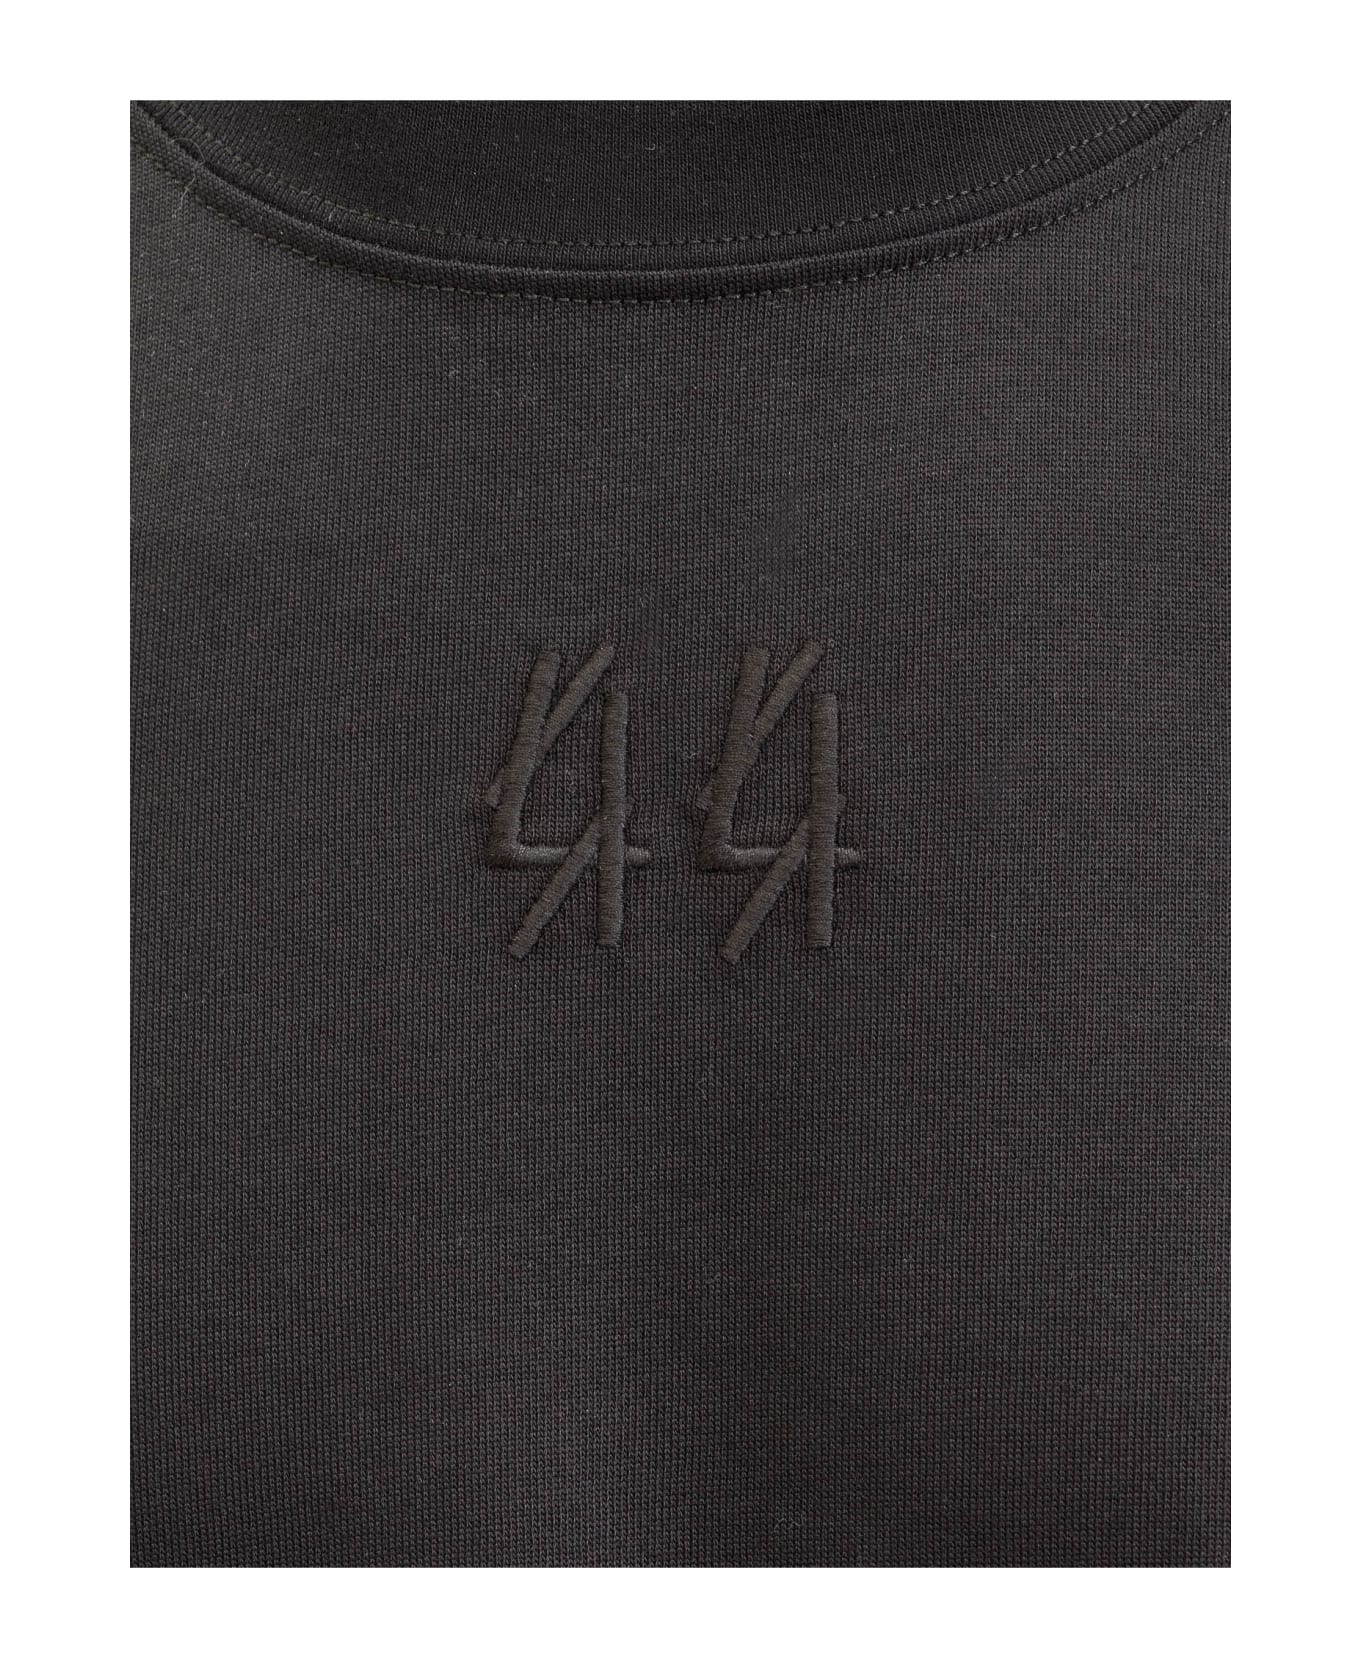 44 Label Group The Enemy T-shirt - BLACK-THE ENEMY PRINT